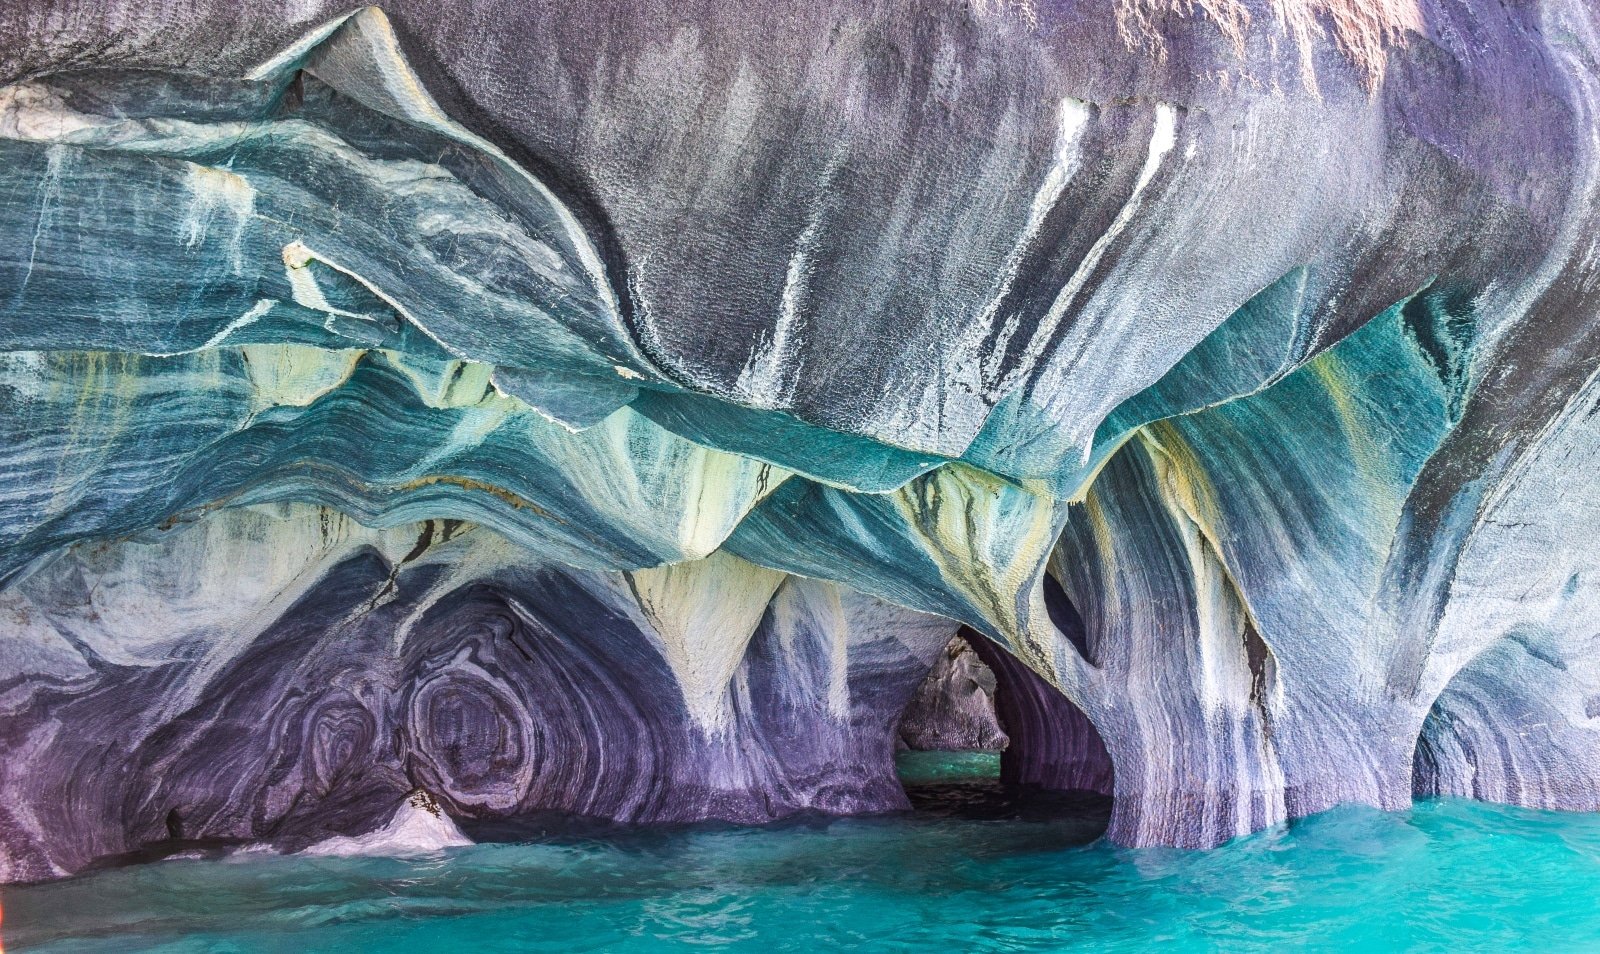 <p><span>The Marble Caves on Lake General Carrera are a breathtaking natural formation. Millennia of waves washing against calcium carbonate have sculpted these caves into stunning formations. The caves’ walls, with their swirling patterns of blue and grey, are a photographer’s dream, especially when reflected in the lake’s azure waters. Accessible only by boat, the caves offer a serene and otherworldly experience.</span></p> <p><b>Insider’s Tip: </b><span>Take a boat or kayak tour for the best views of the caves.</span></p> <p><b>When To Travel: </b><span>Visit between September and February for the best weather.</span></p> <p><b>How To Get There: </b><span>Fly to Balmaceda, then drive to Puerto Río Tranquilo, where tours to the caves are available.</span></p>